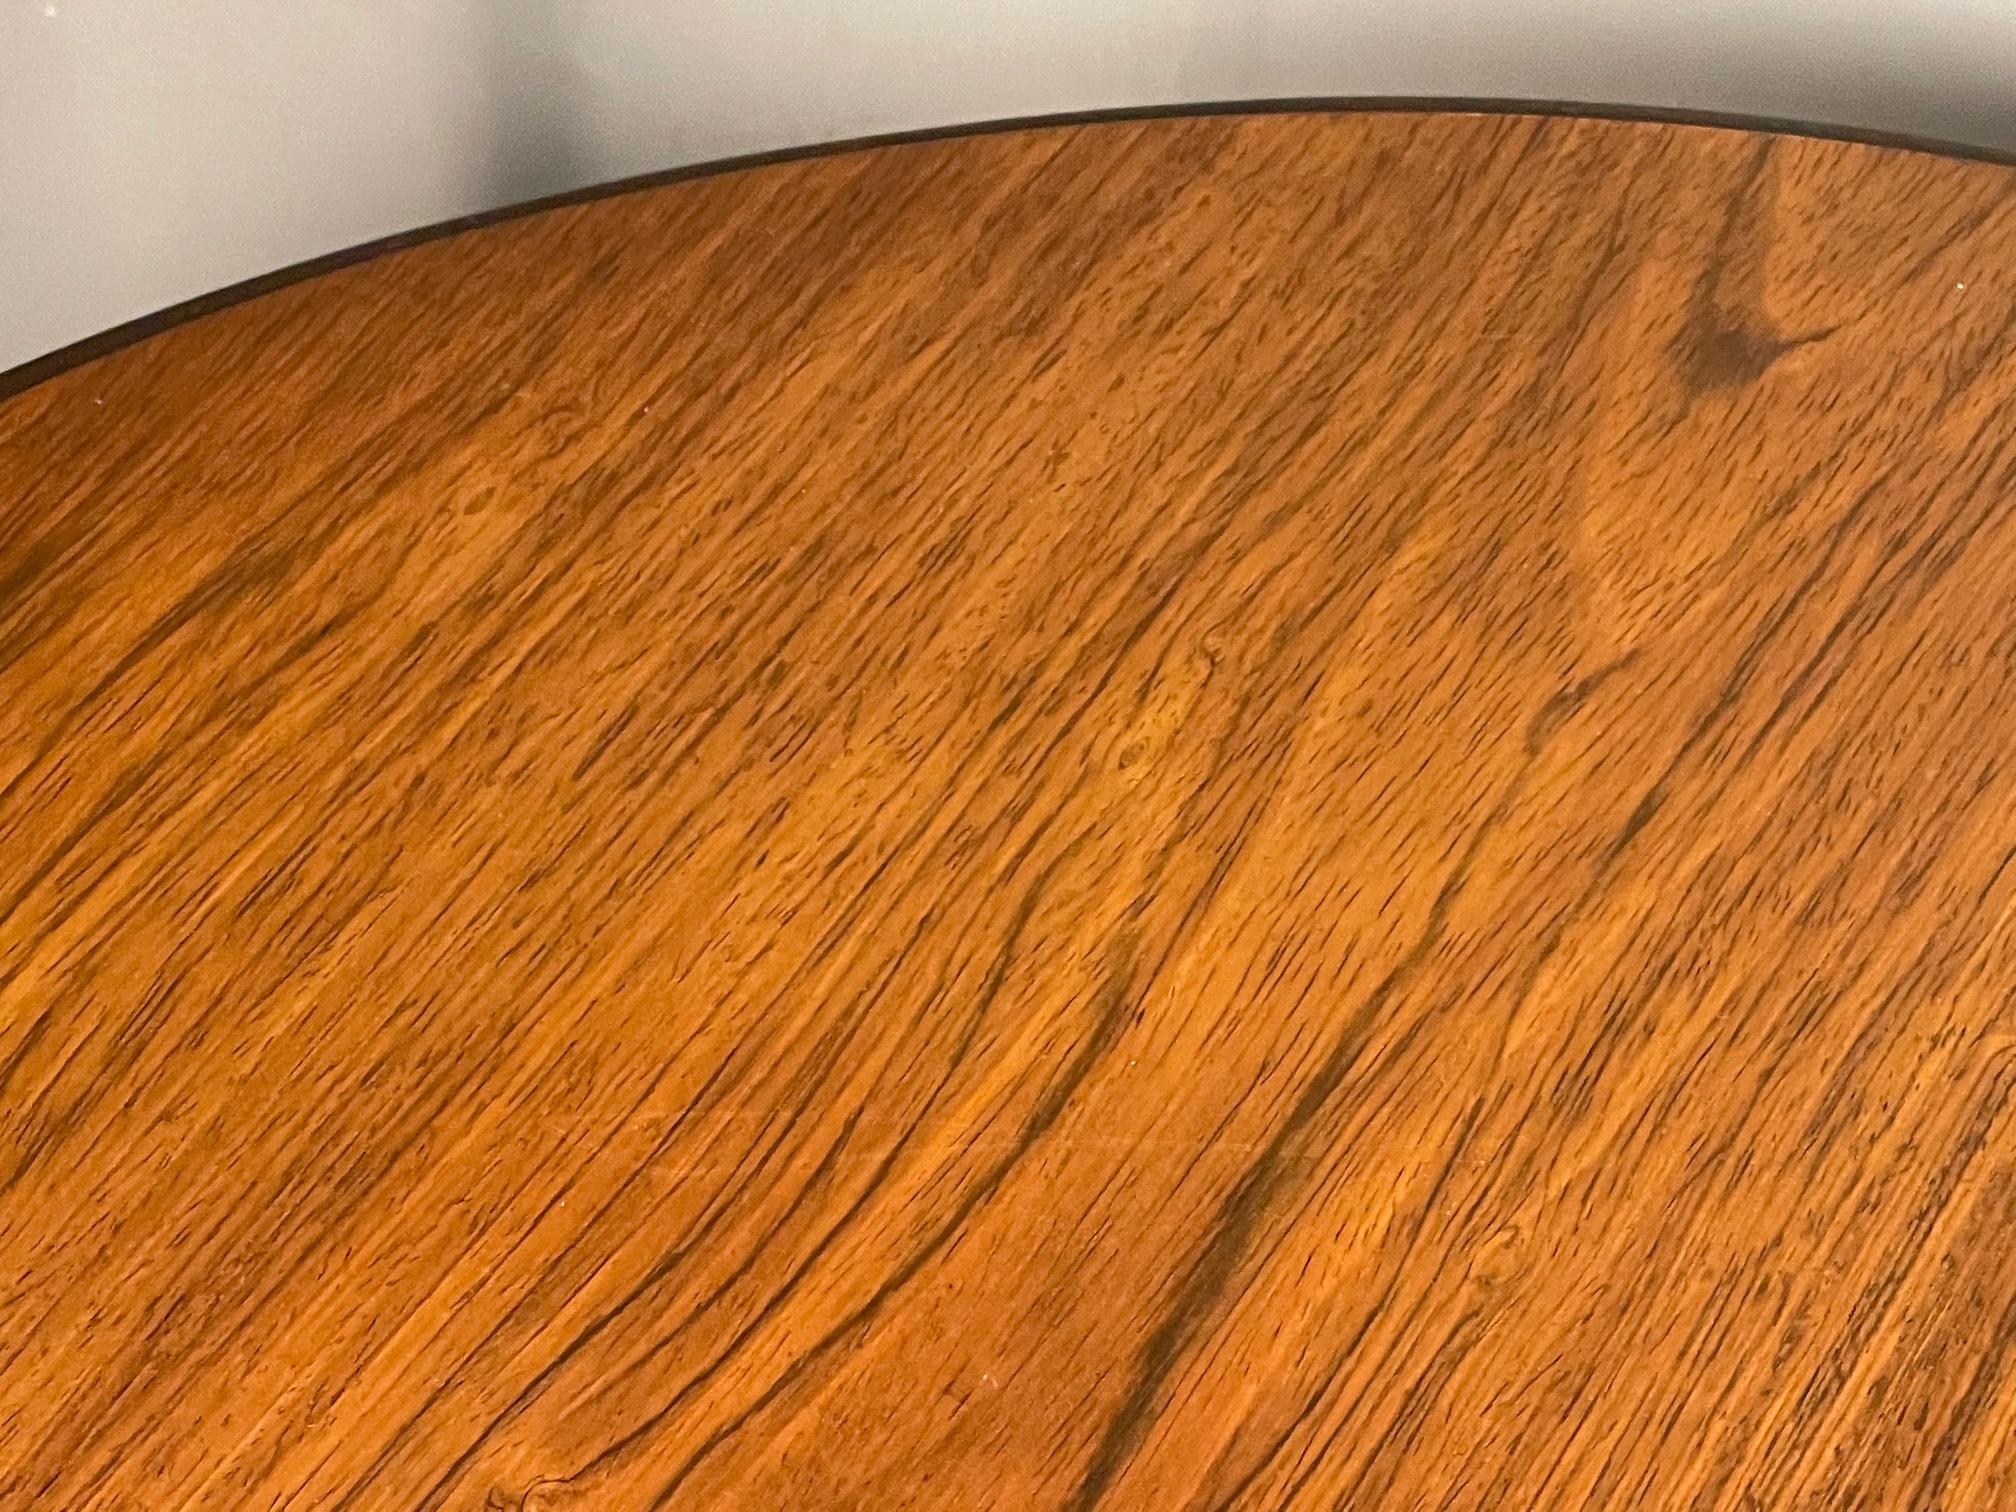 A pair of unusual tables by Dunbar ca' 1970's. Large scale-perfect as end tables or lamp tables, walnut tops, legs have a stuctural cut out detail.